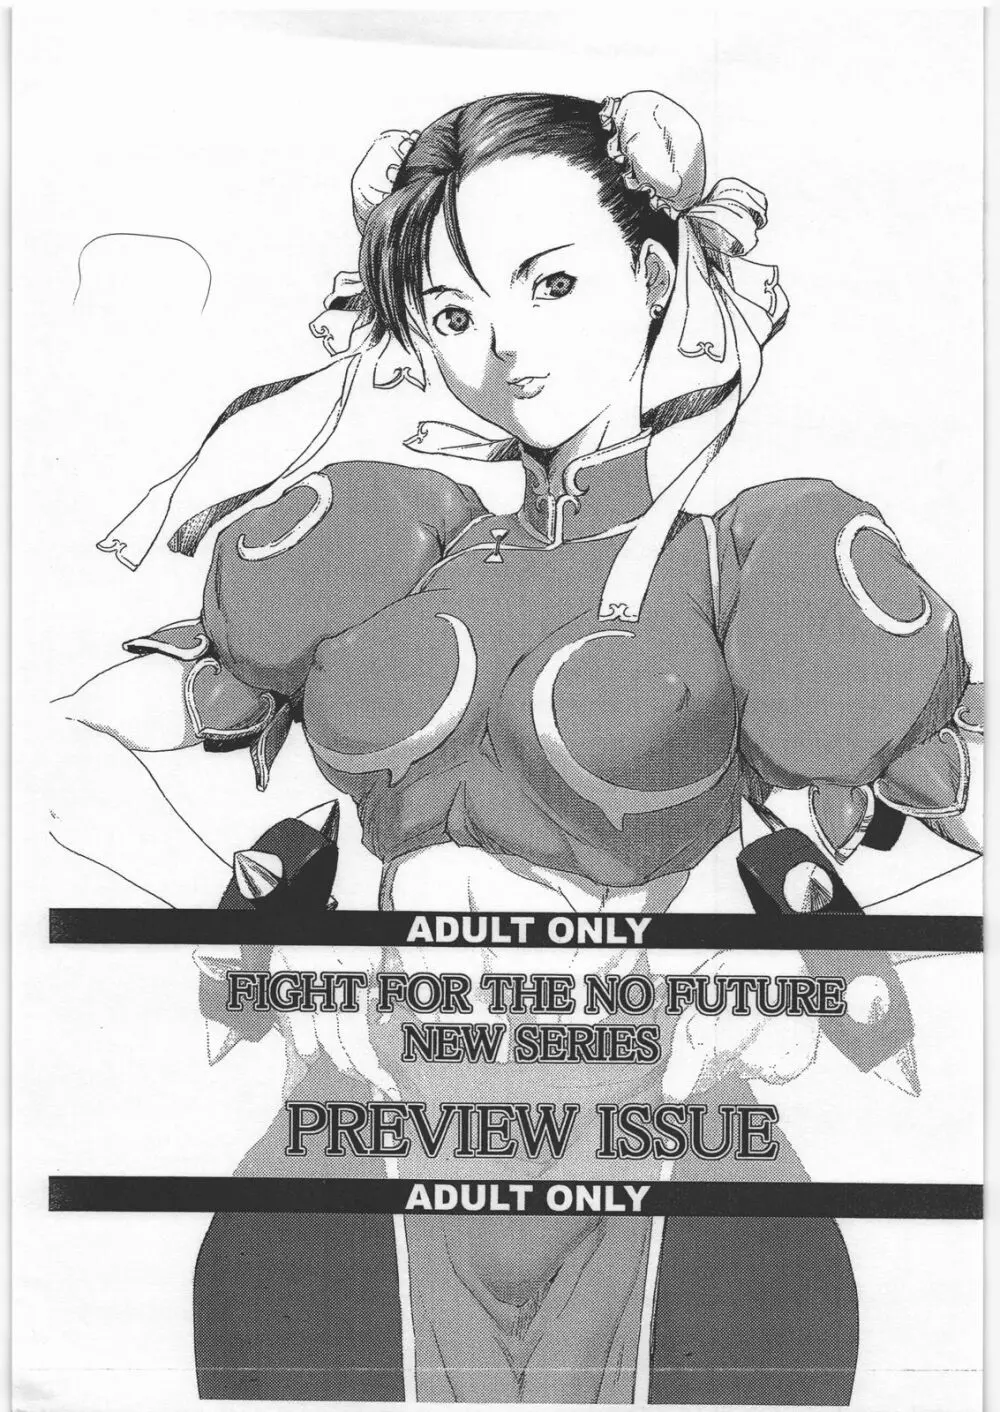 FIGHT FOR THE NO FUTURE NEW SERIES PREVIEW